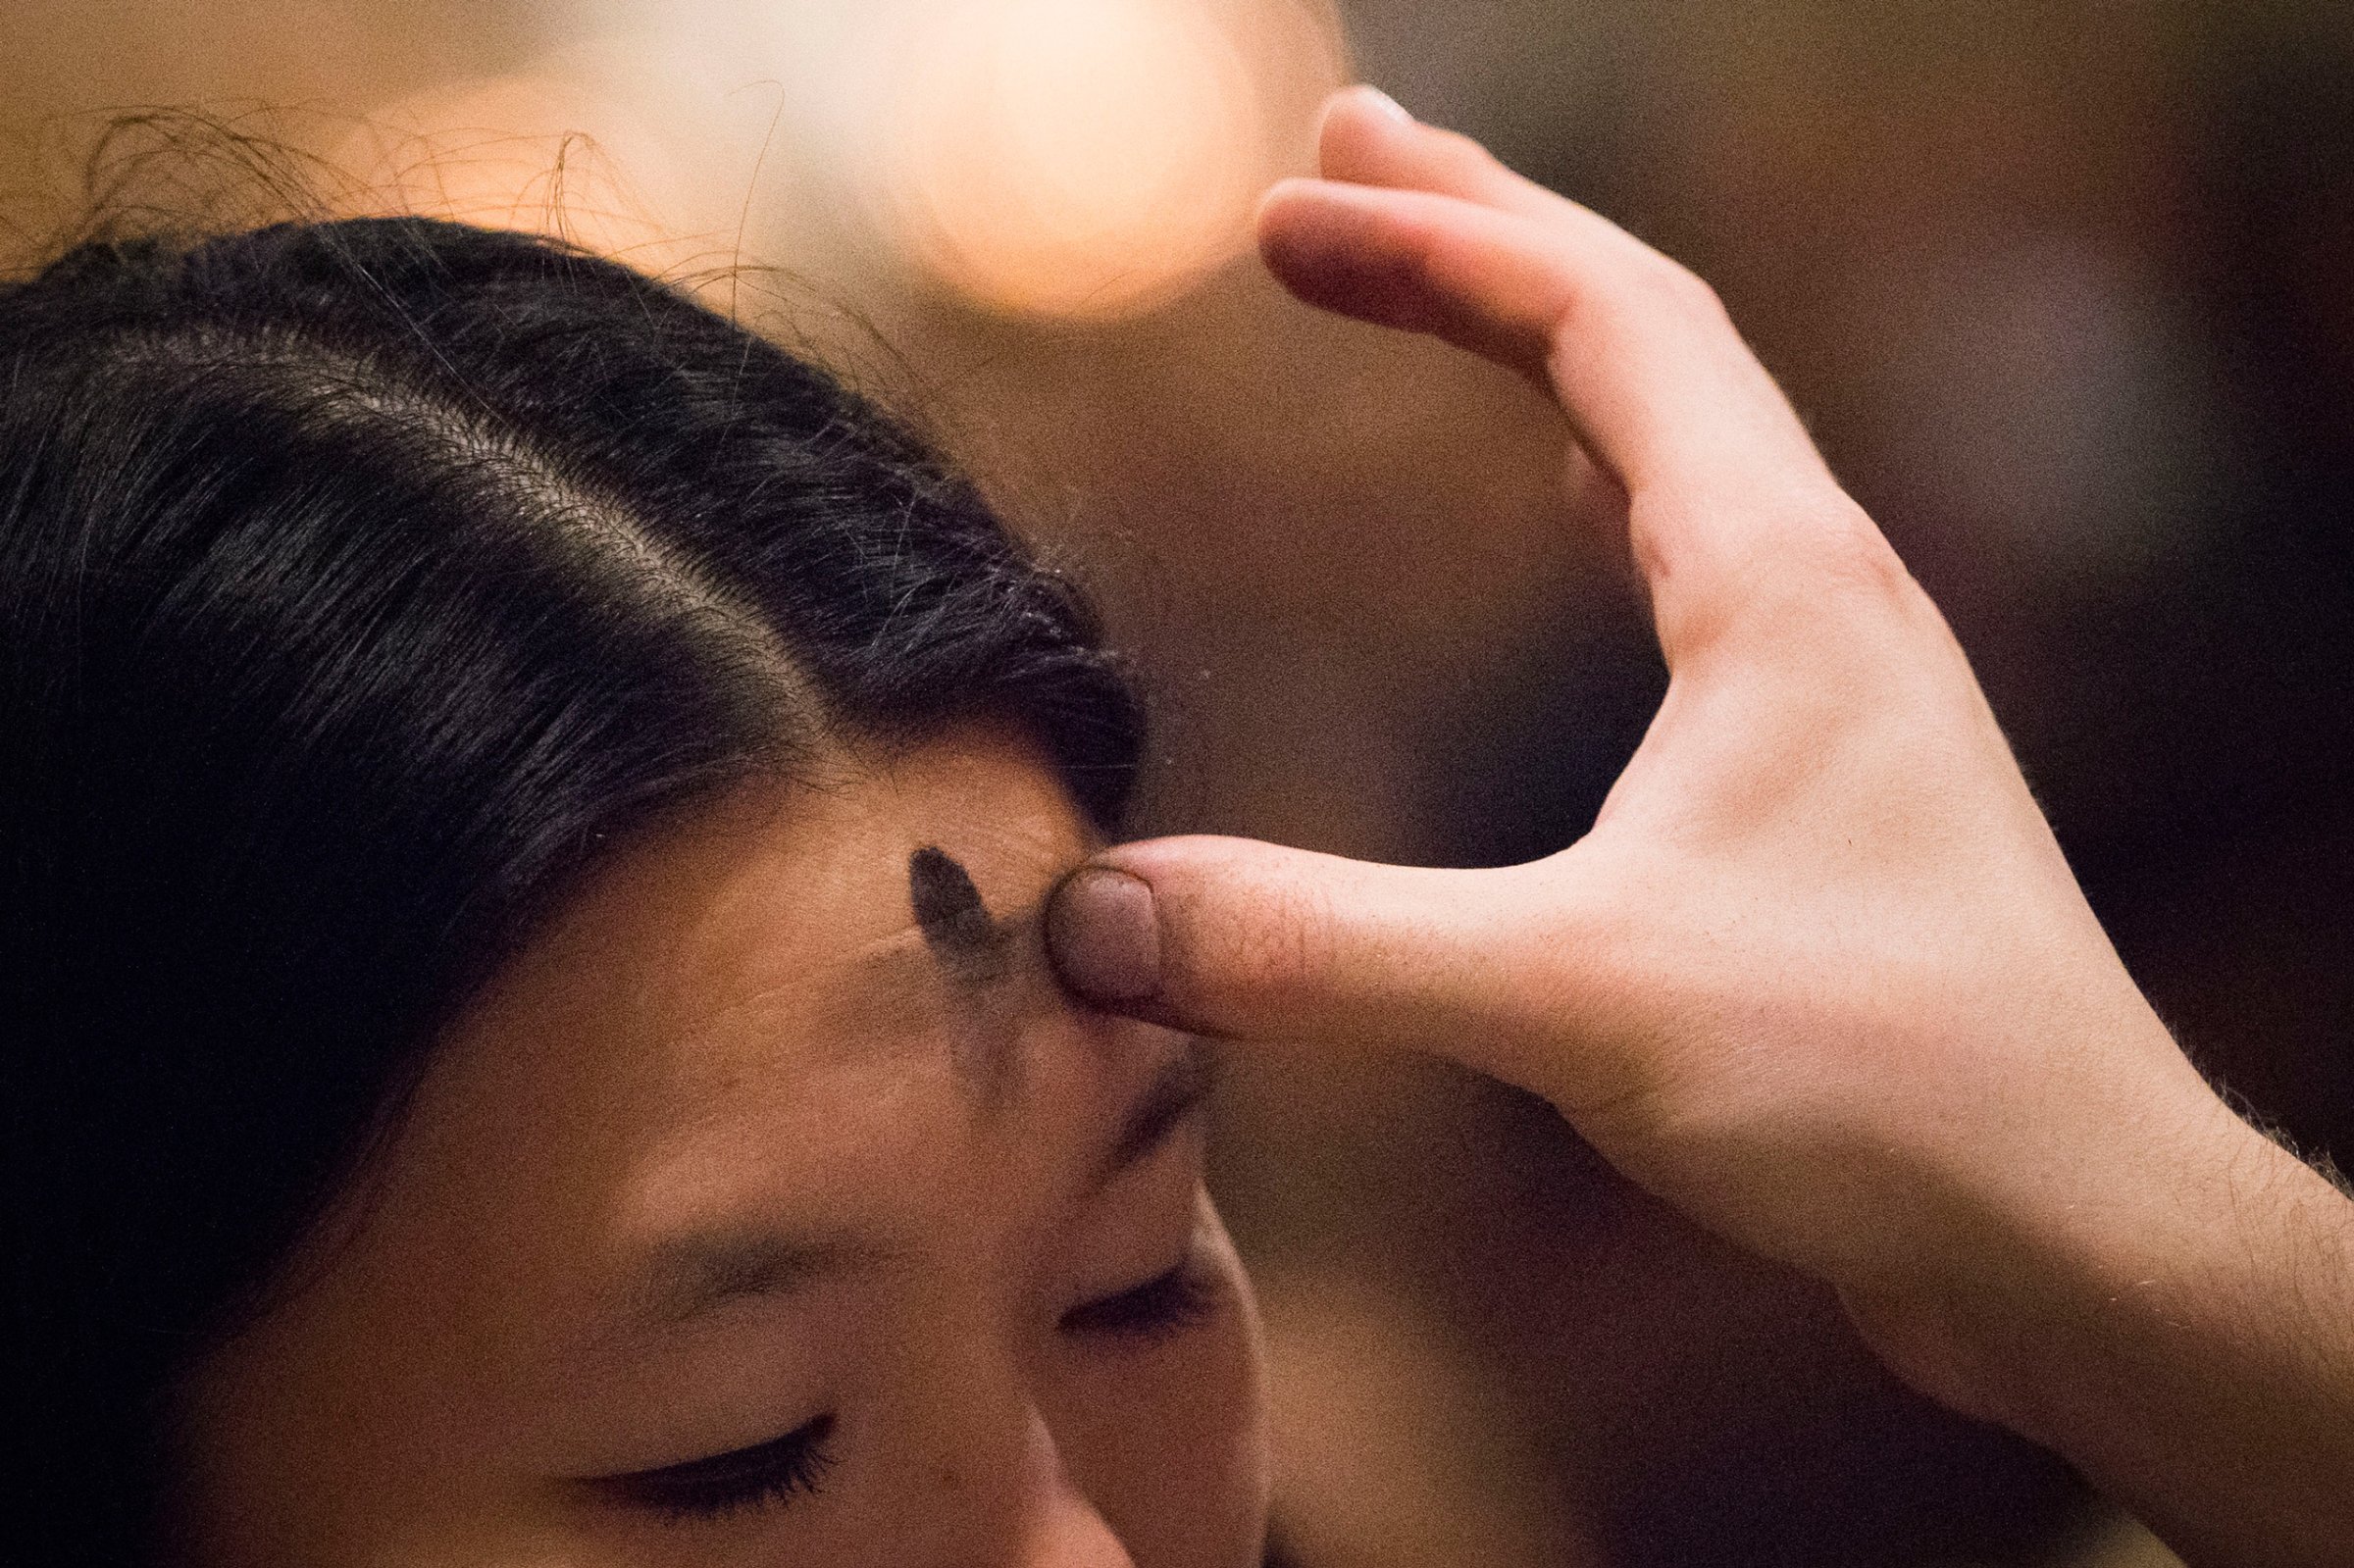 A woman receives ashes at Saint Patrick's Cathedral on Ash Wednesday in New York February 13, 2013. REUTERS/Adrees Latif (UNITED STATES - Tags: RELIGION ANNIVERSARY) - RTR3DQUC